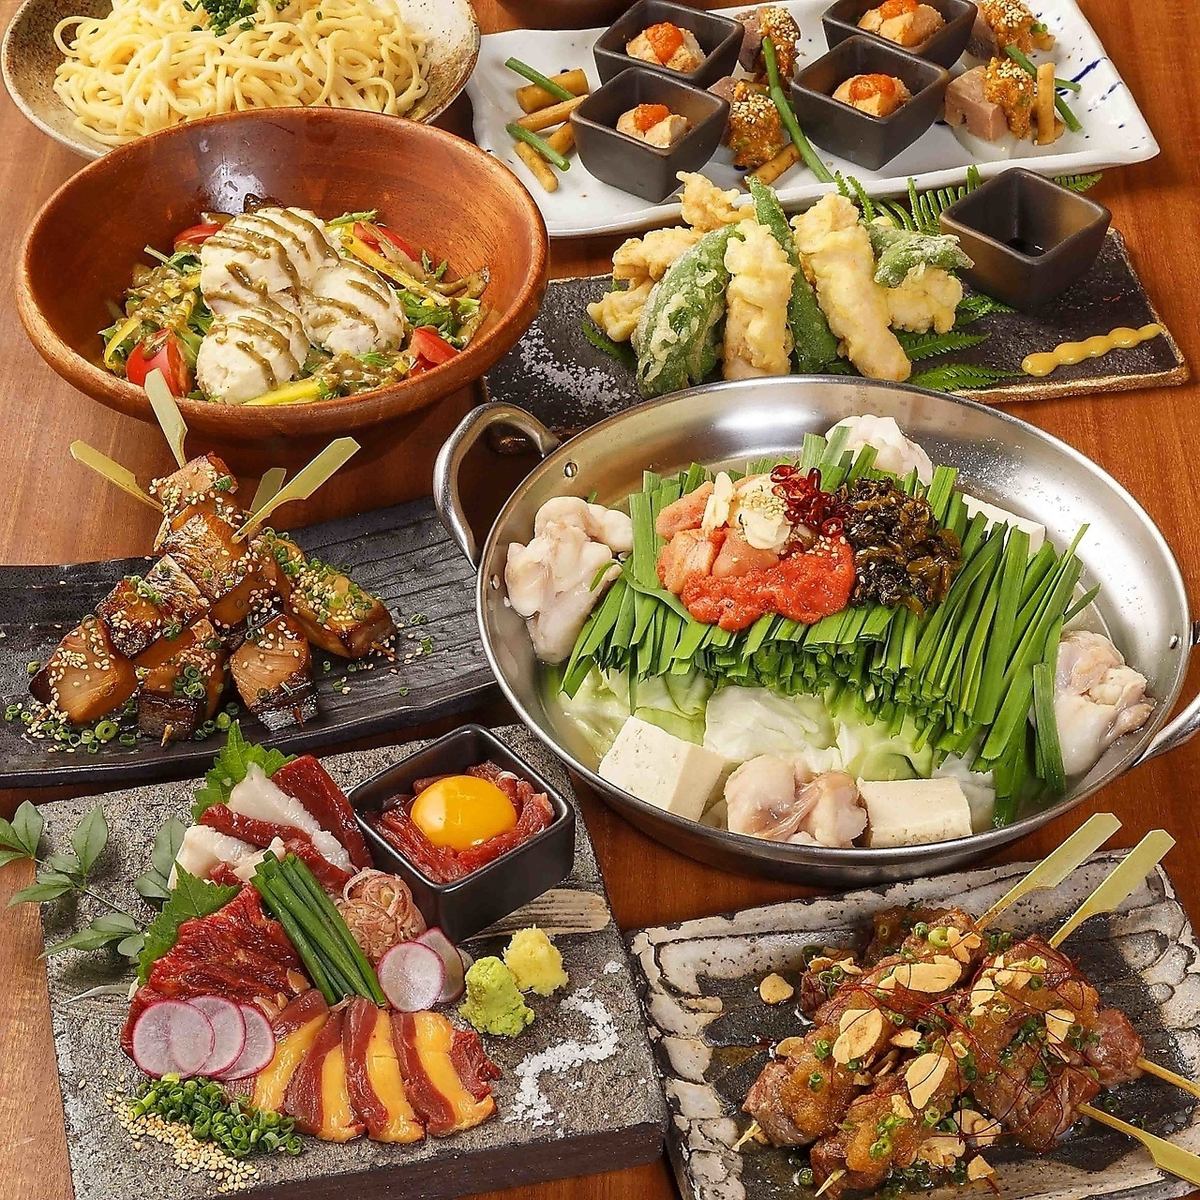 We offer a 3-hour course where you can enjoy Hakata cuisine and a wide variety of all-you-can-drink